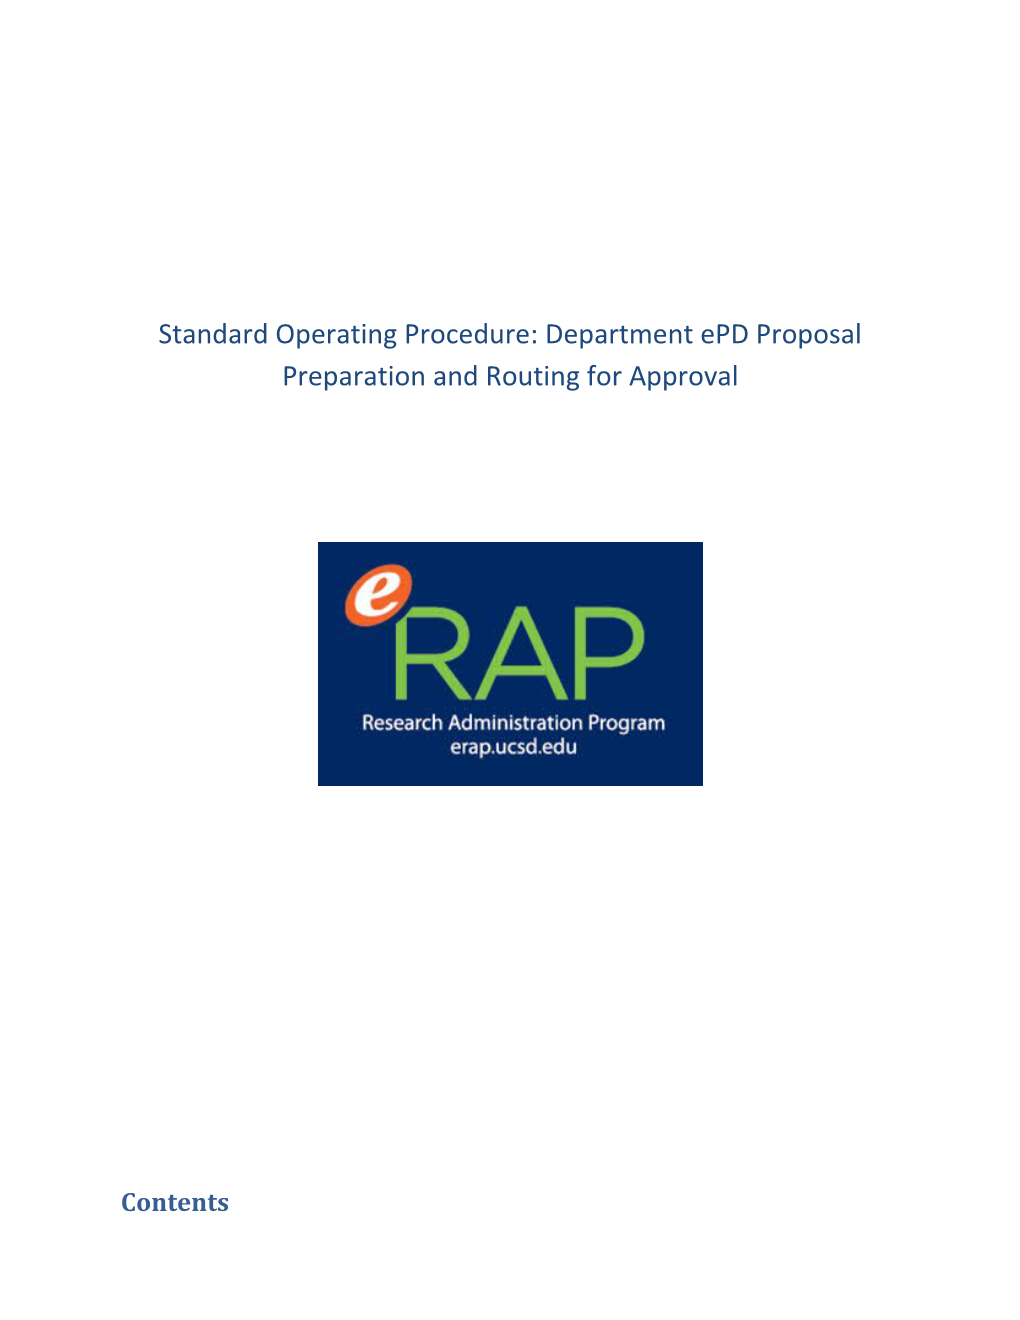 Standard Operating Procedure: Department Epd Proposal Preparation and Routing for Approval